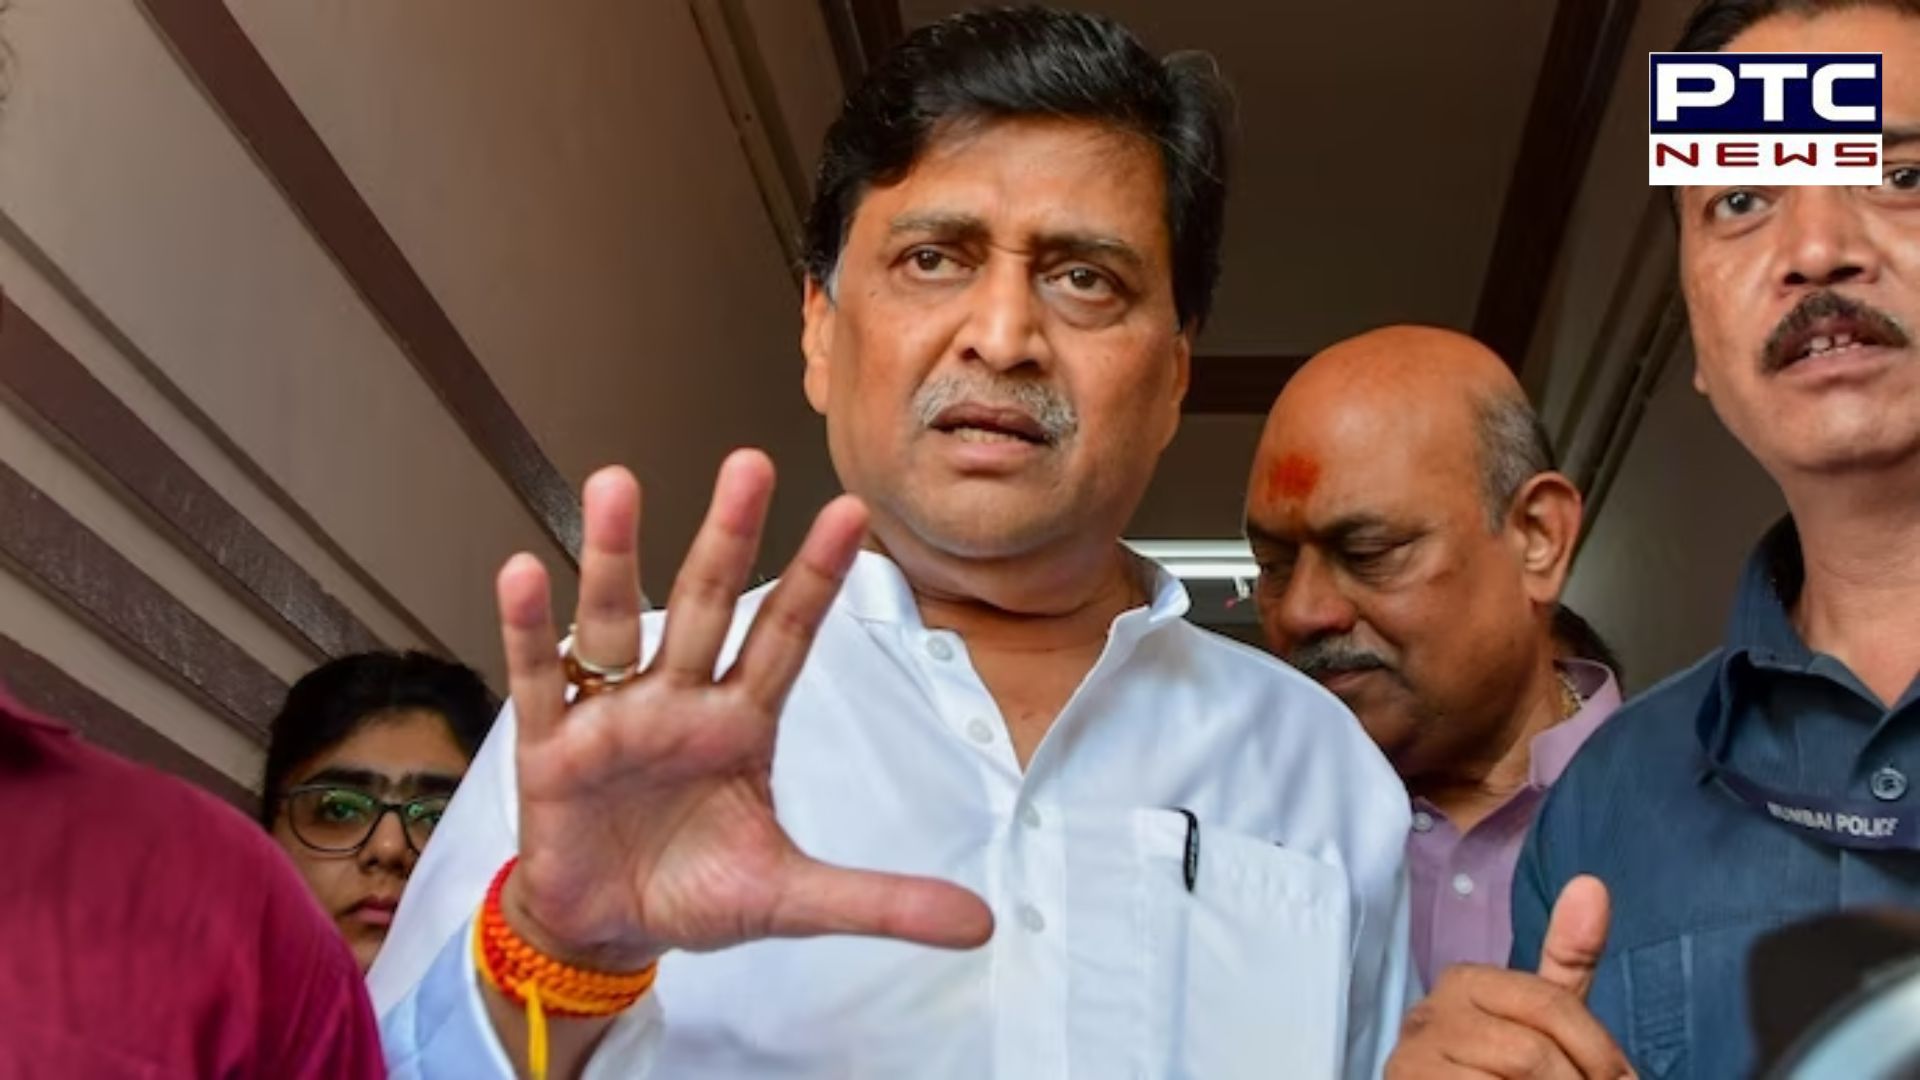 Day after quitting Congress Ashok Chavan likely to join BJP